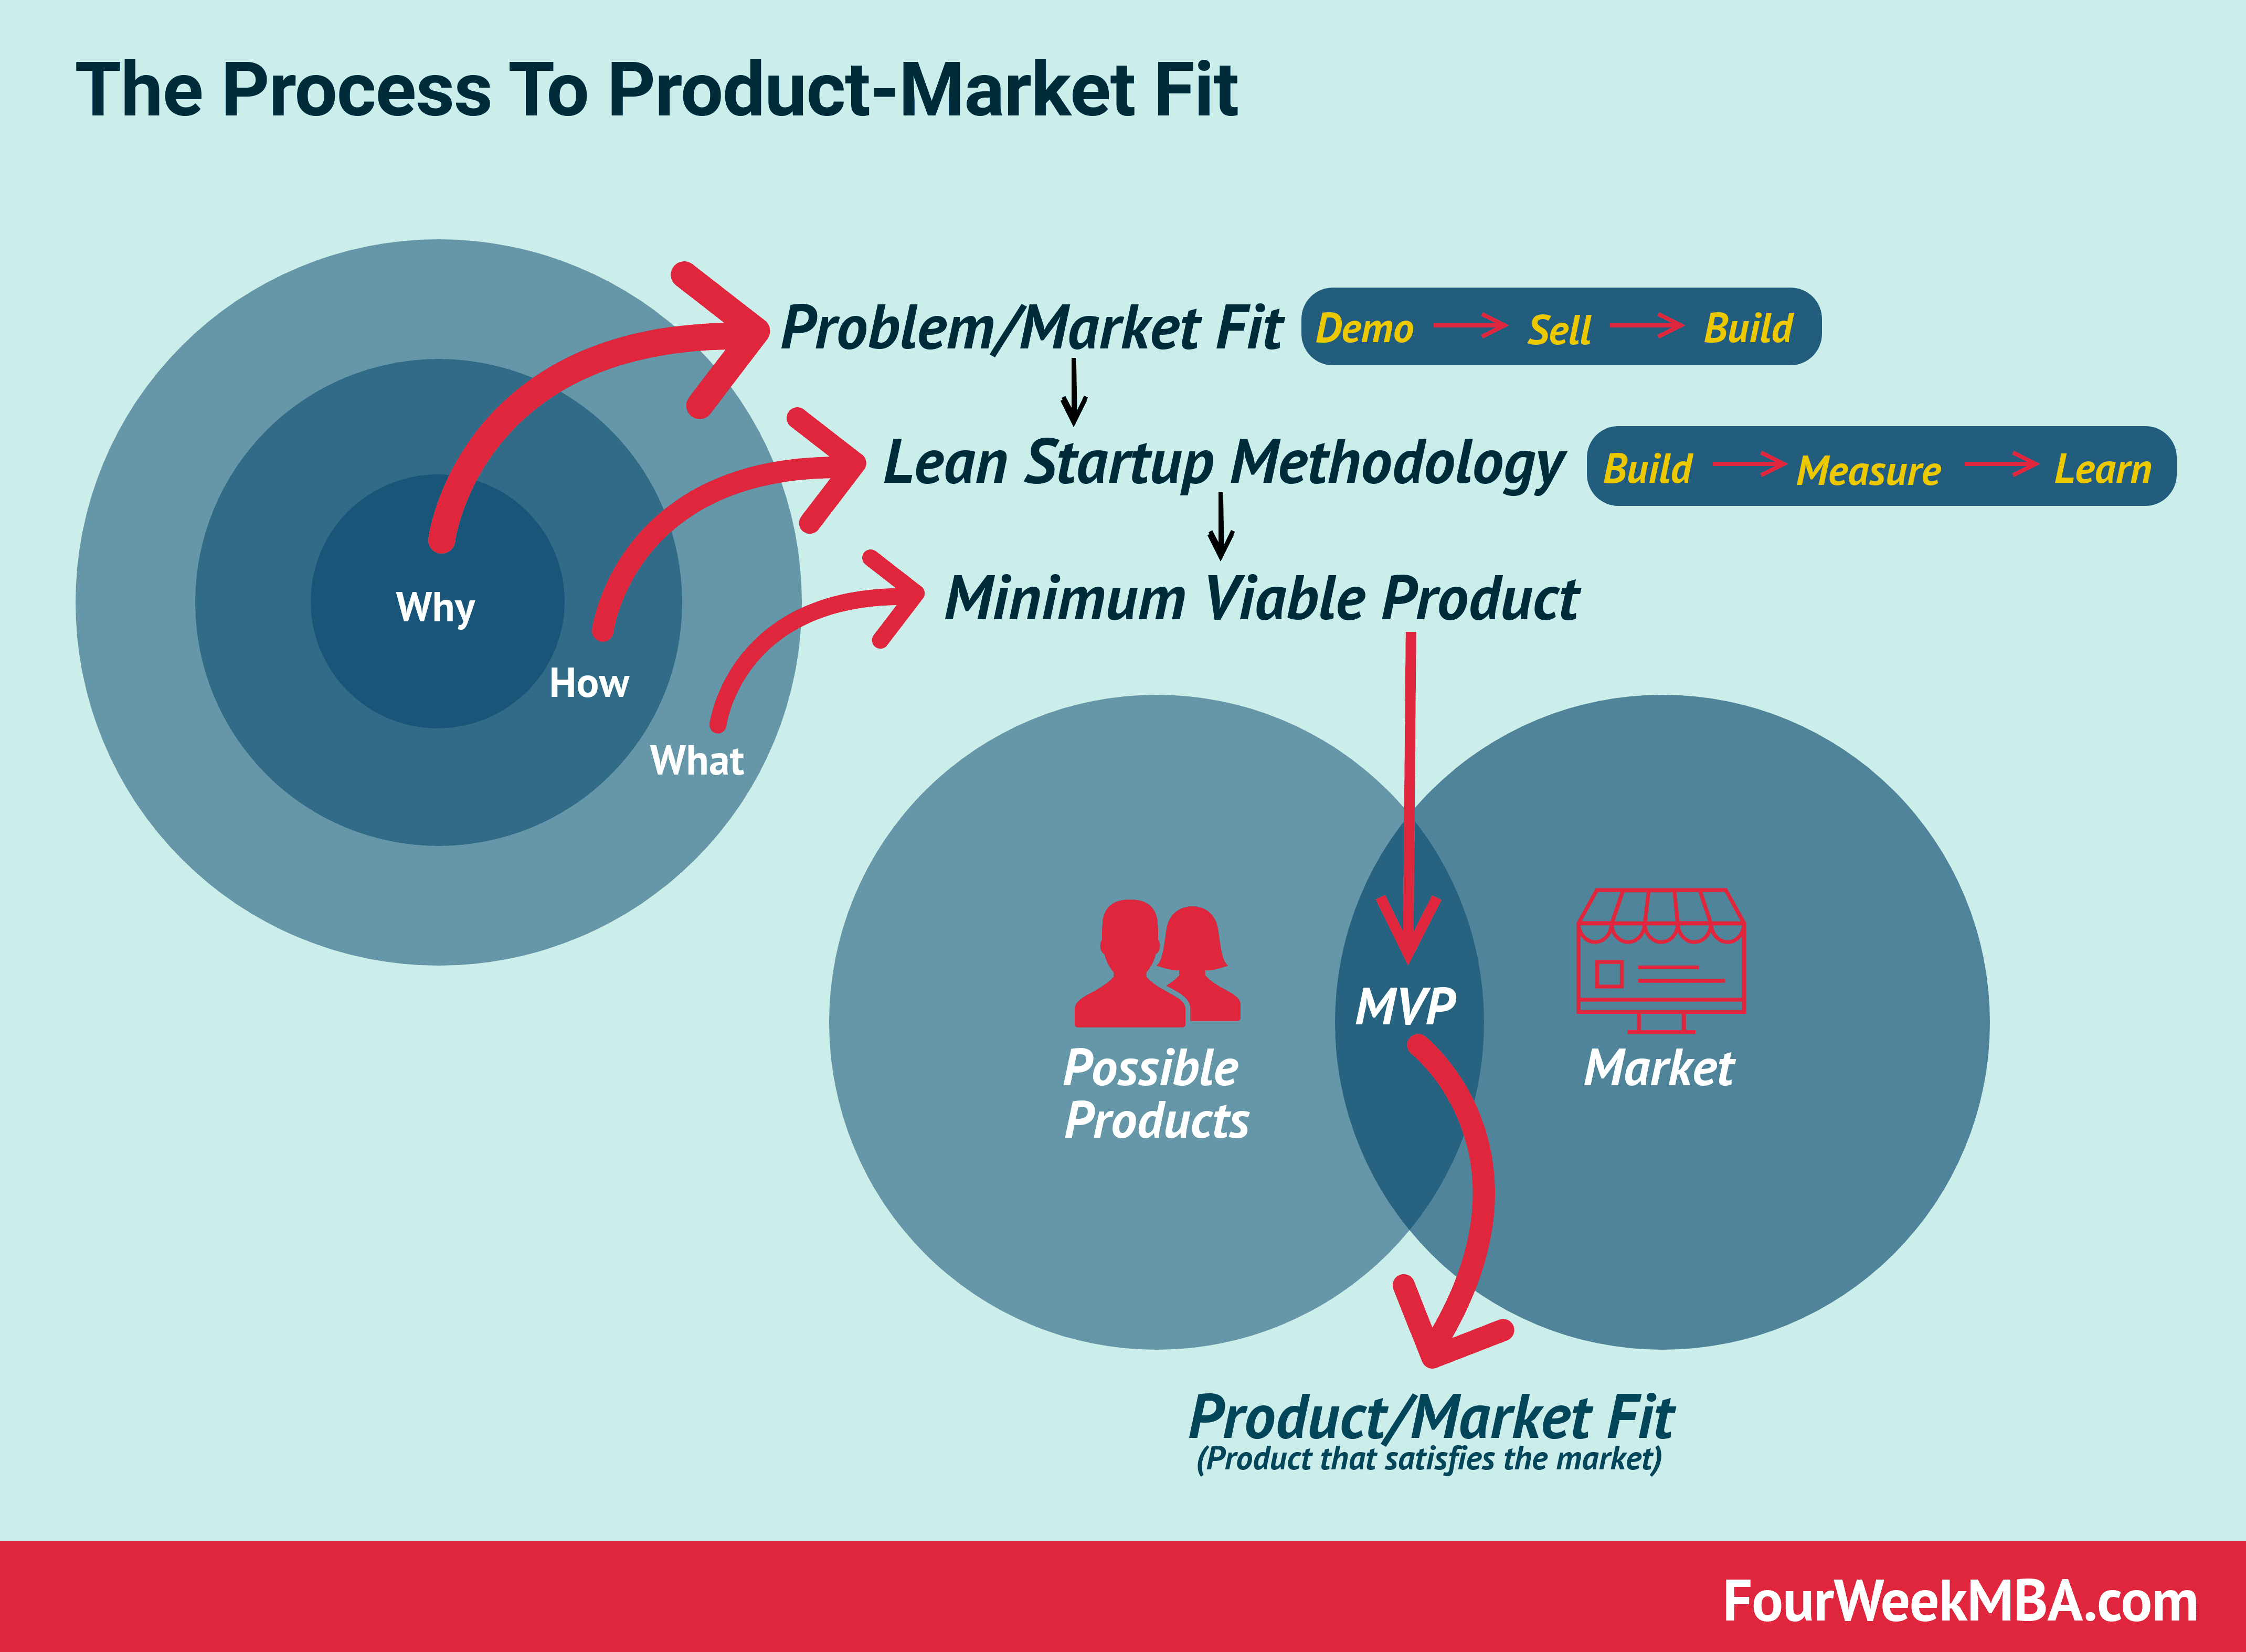 What Is Product-Market Fit? Product-Market Fit In A Nutshell - FourWeekMBA